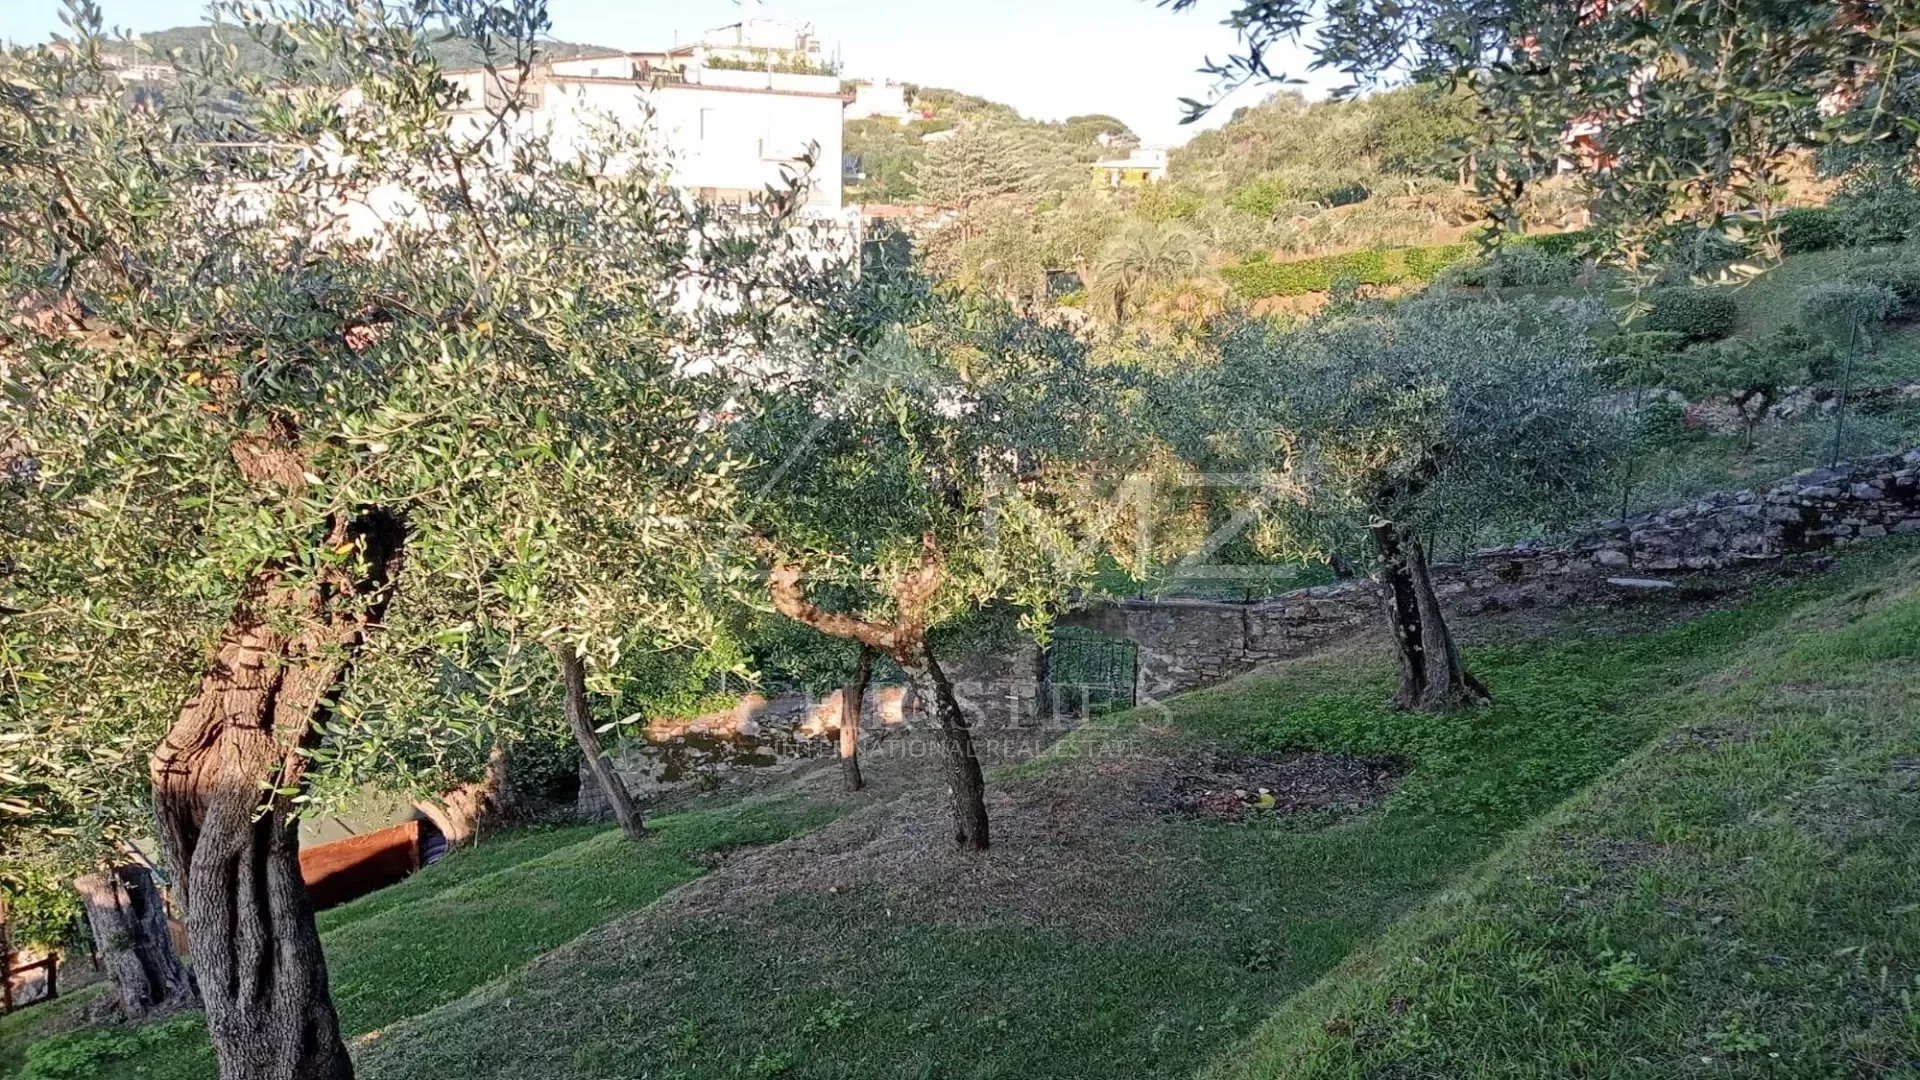 Villa located in the main square of Lerici with garden and sea view